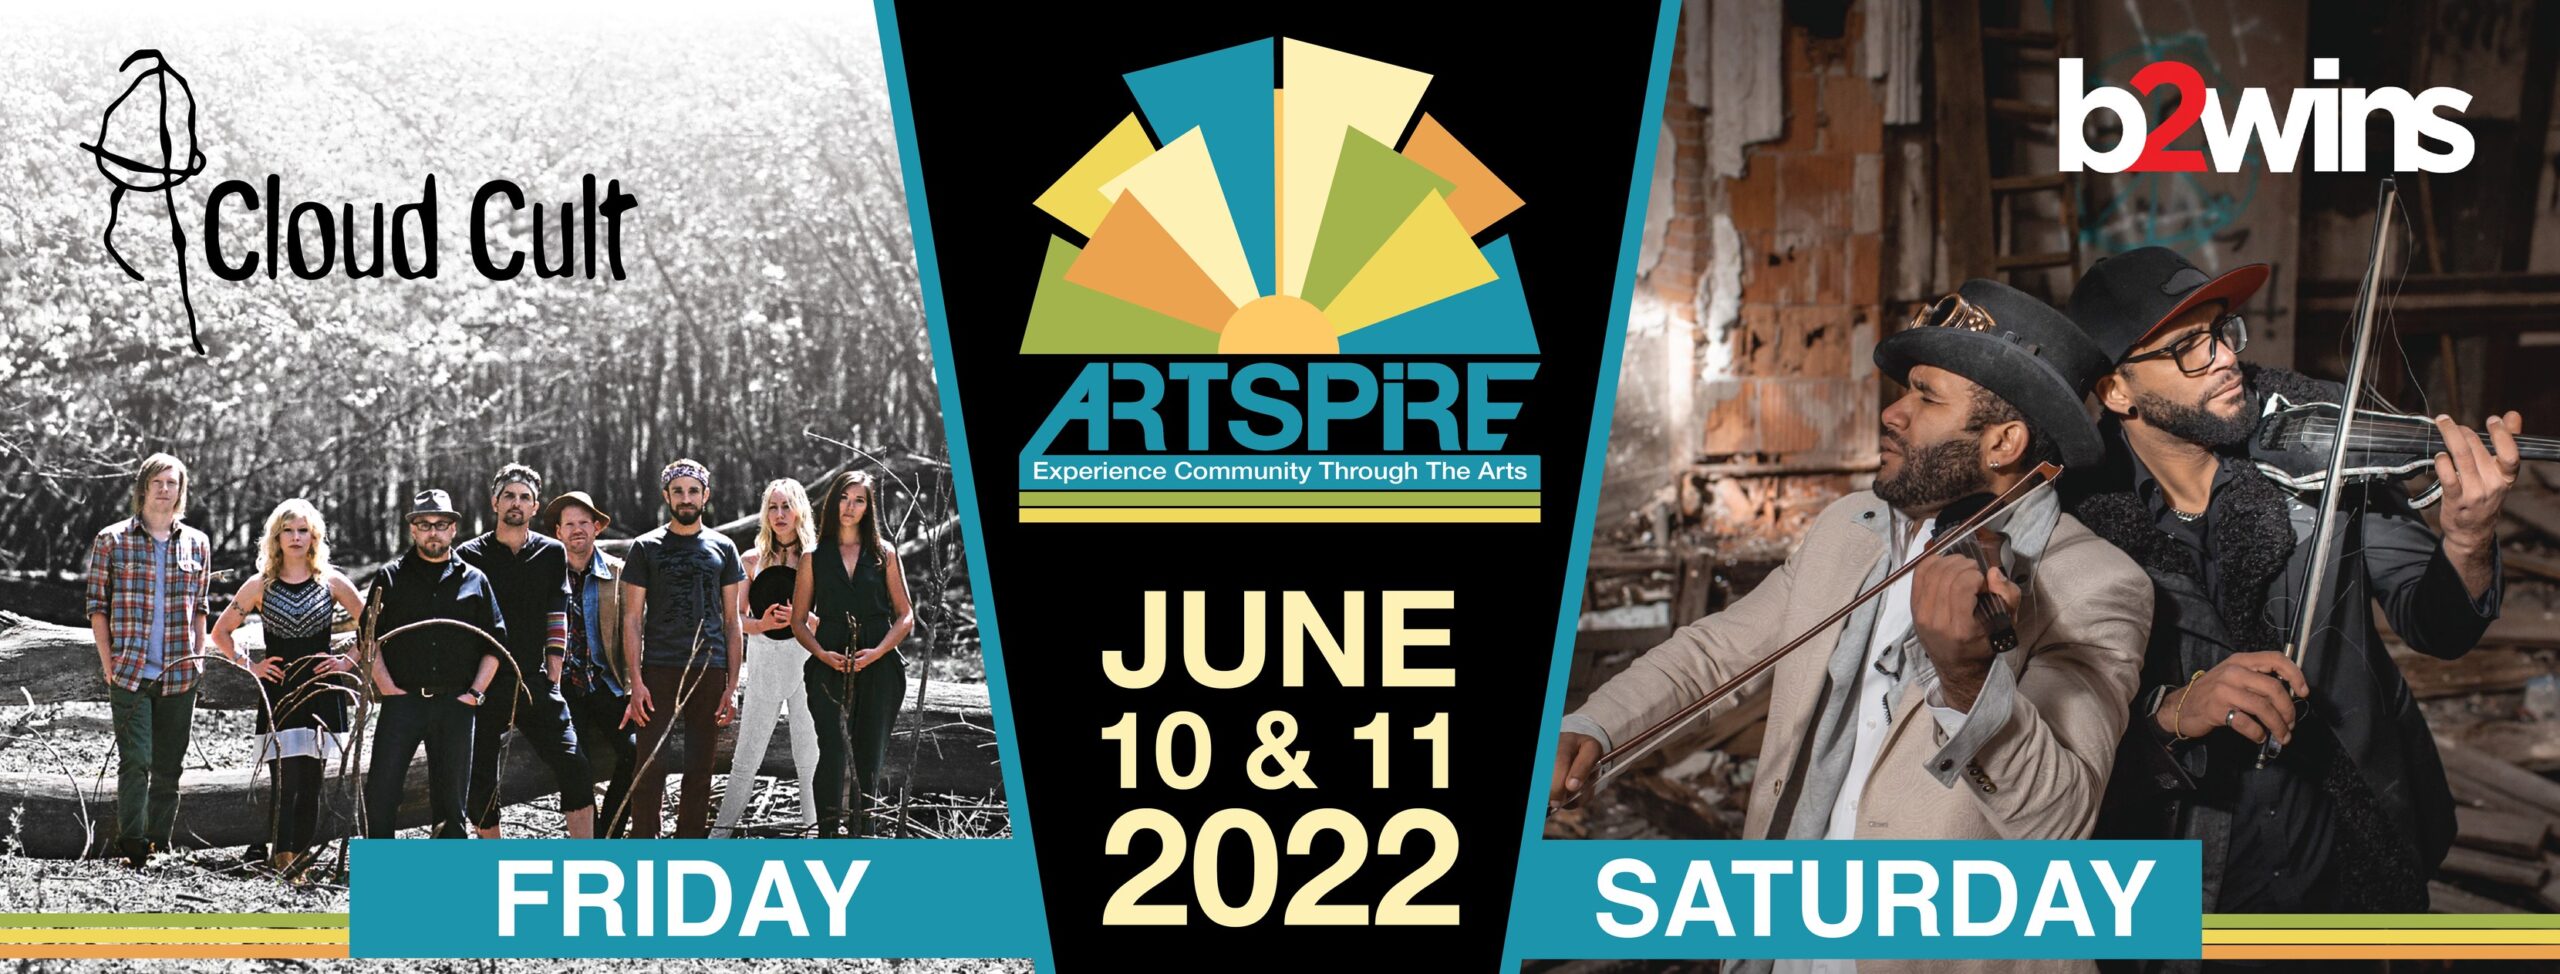 Artspire is Back with a Full Weekend of Visual and Performing Arts, Dance, and Theater in La Crosse, WI